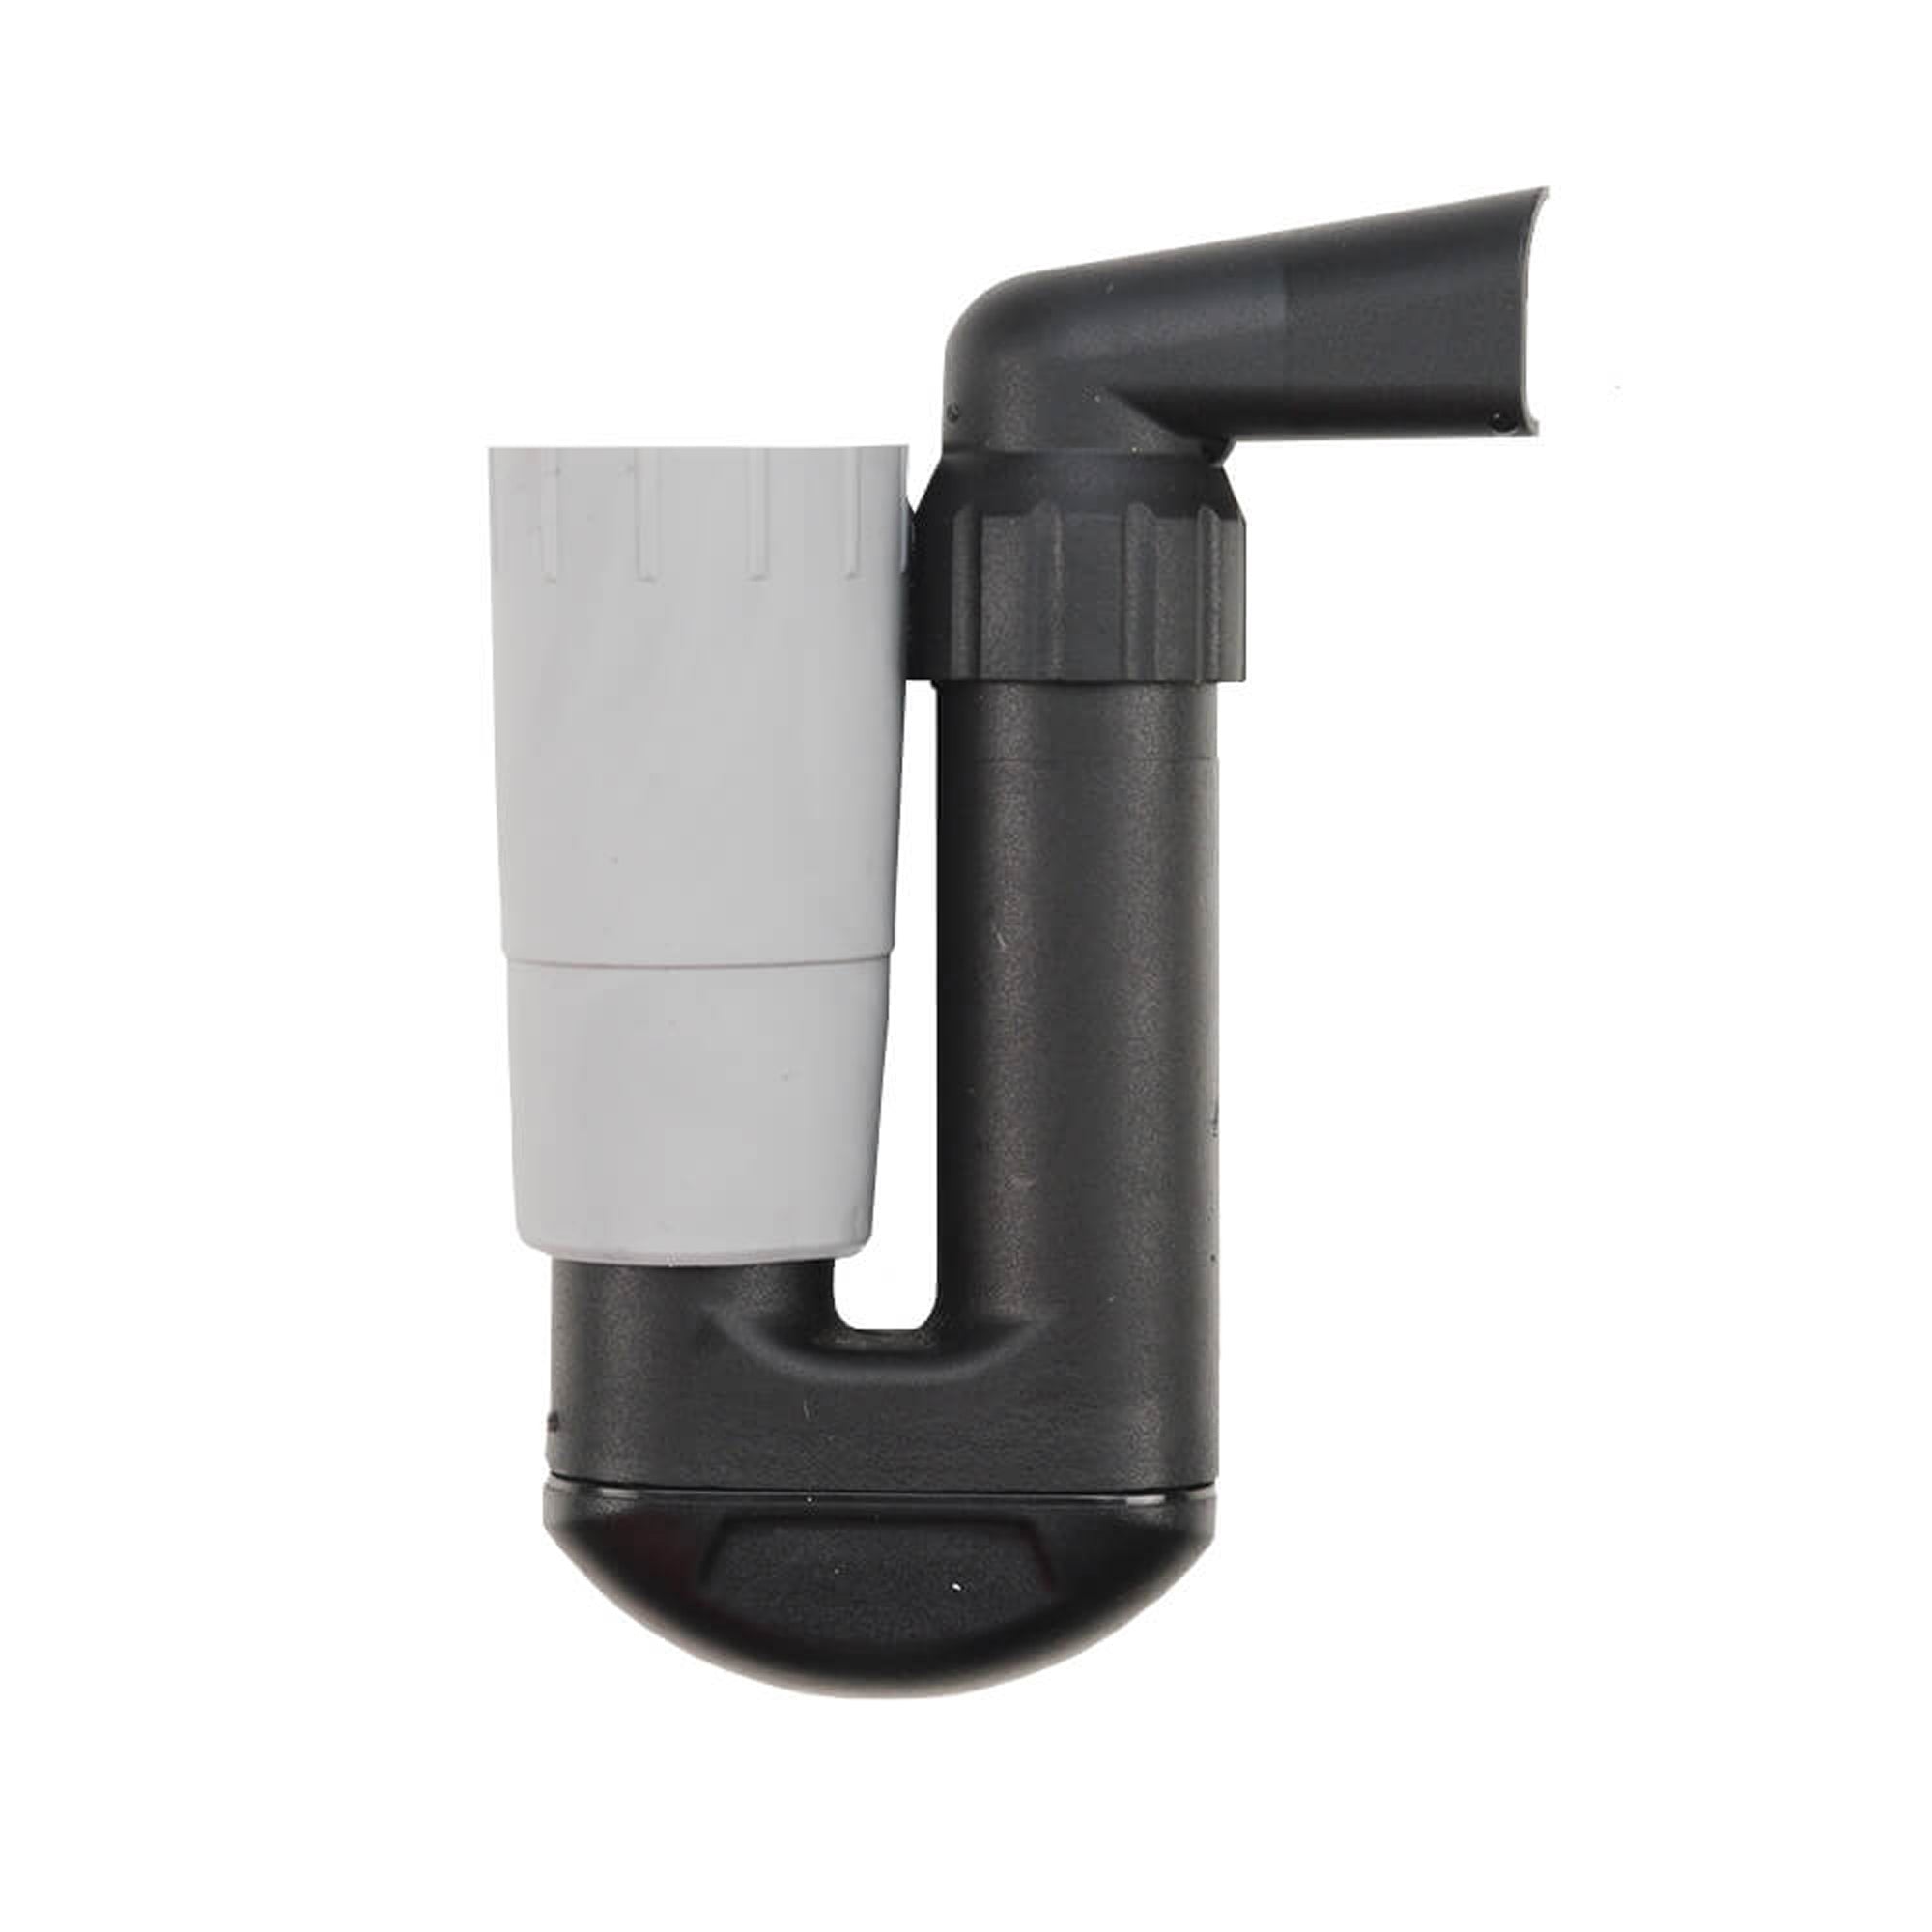 Fluval Replacement Output Nozzle for 04, 05, 06, 07 Series Filters